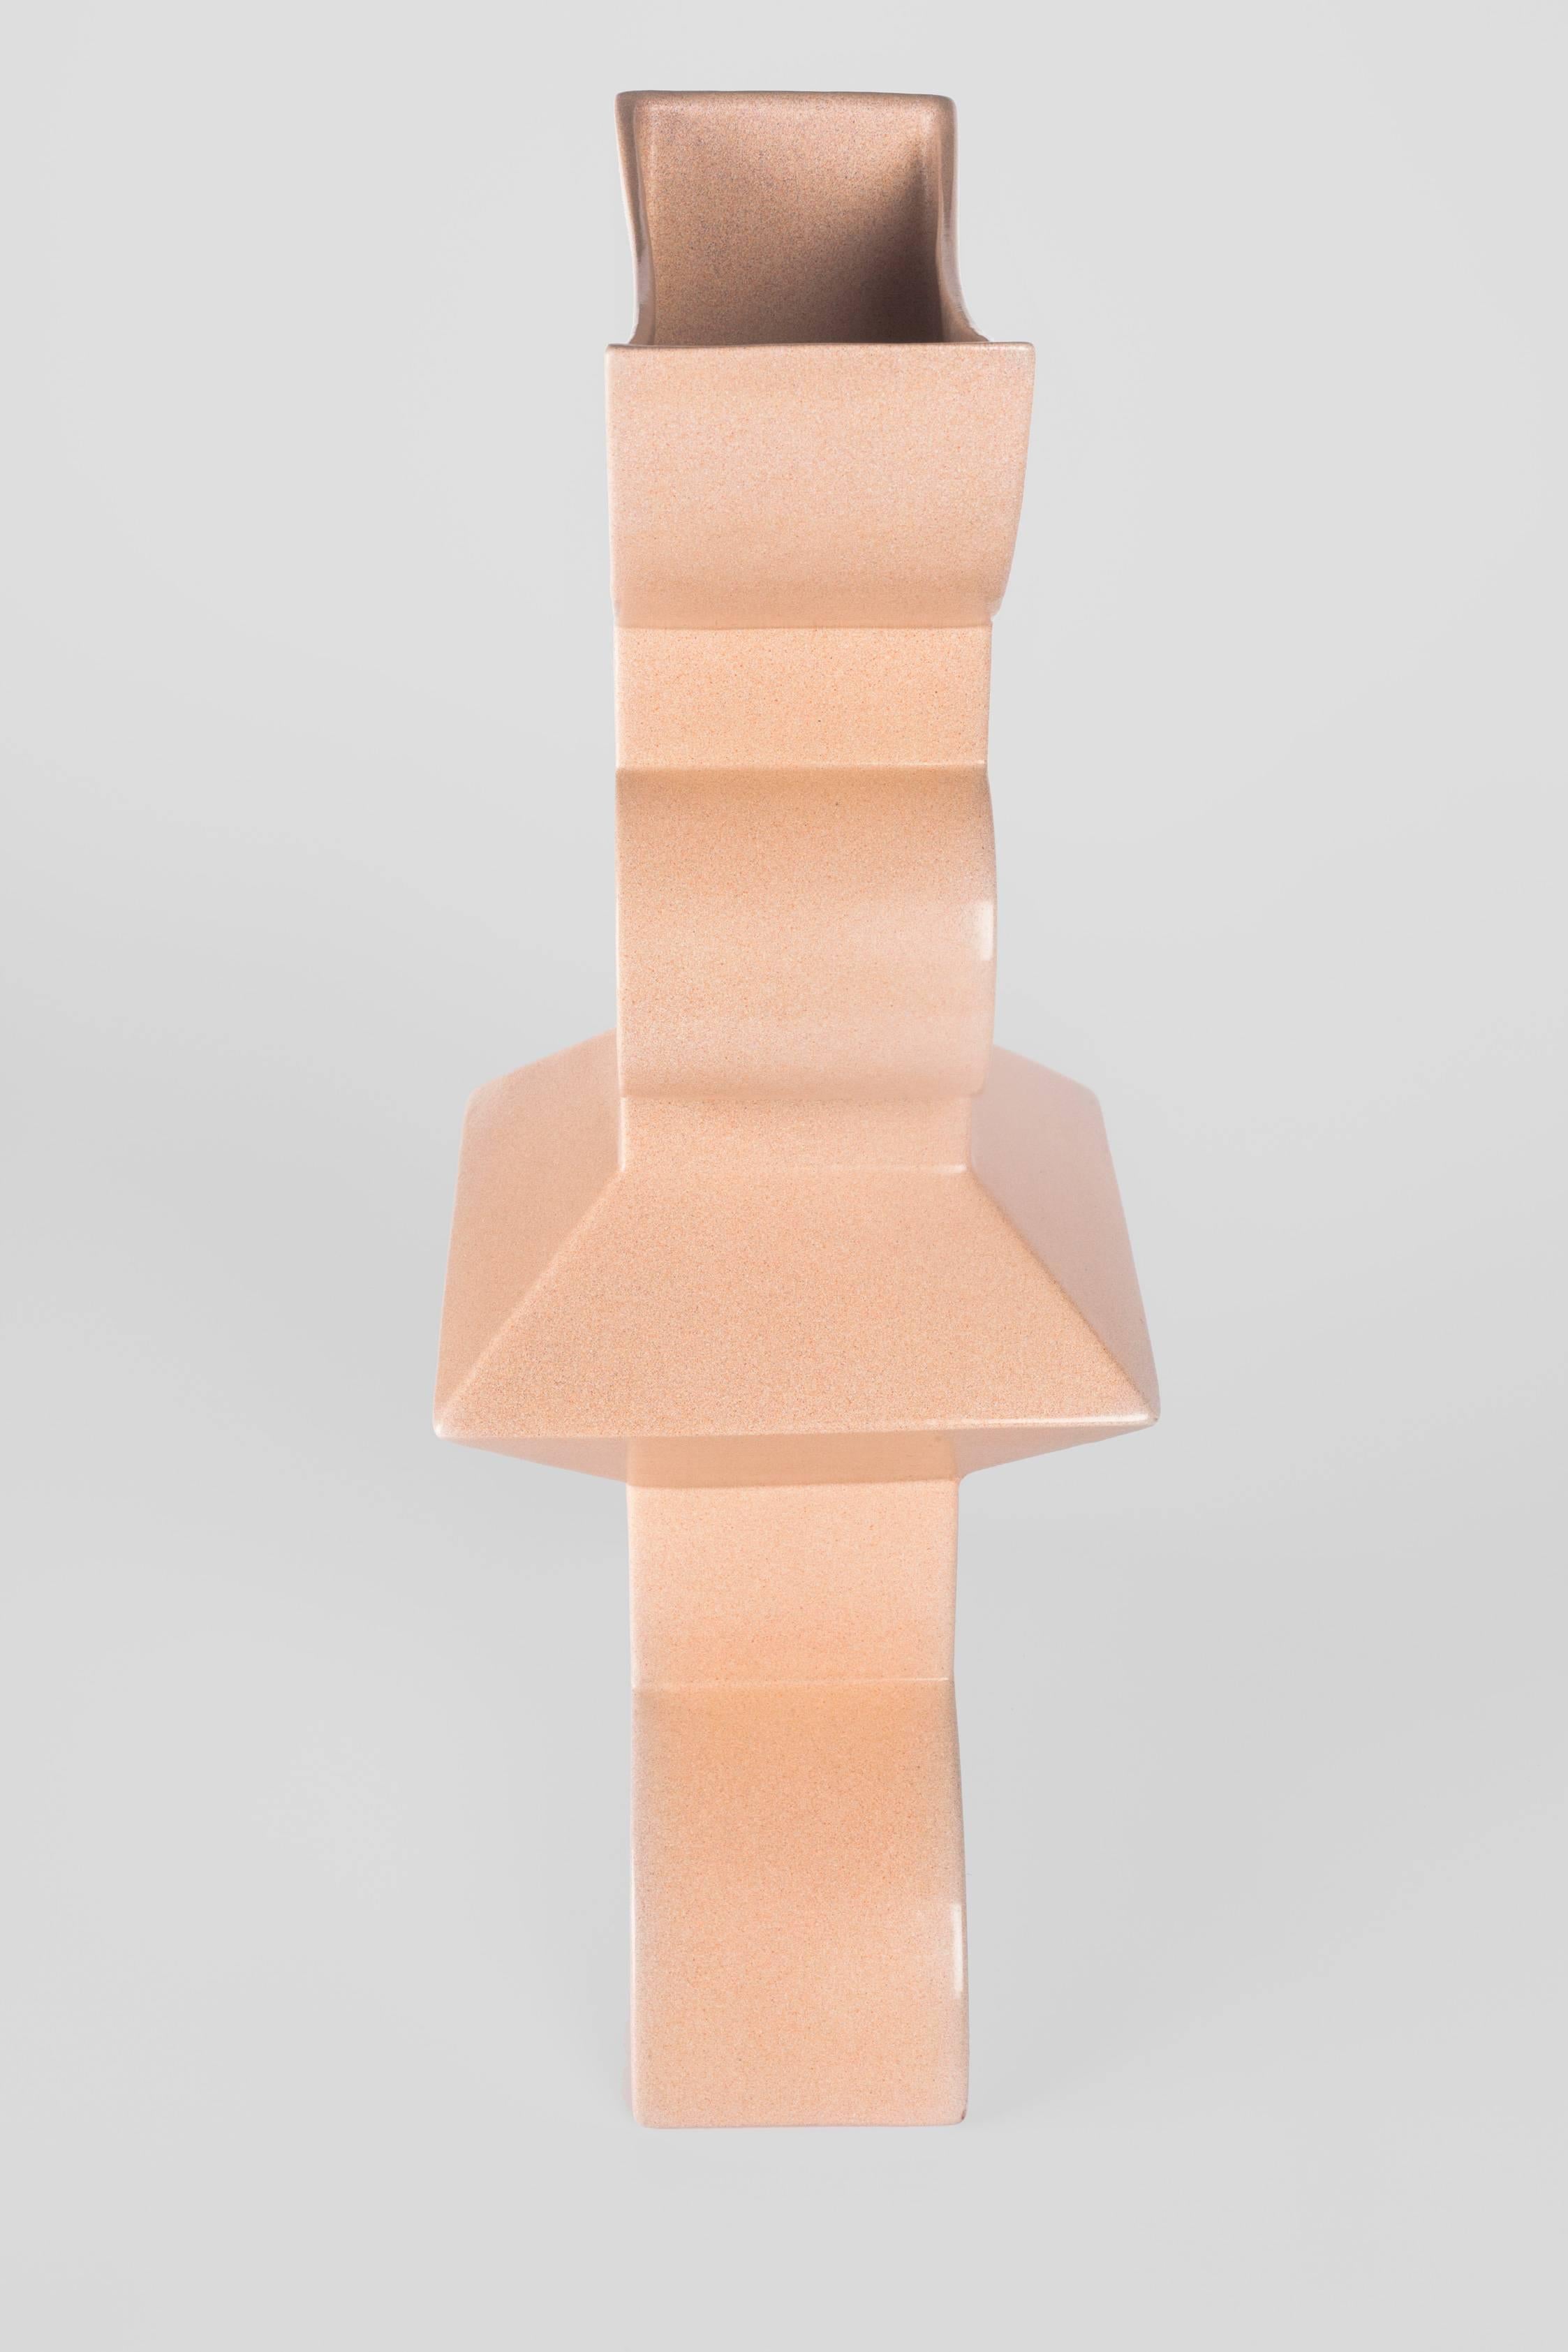 Hungarian Postmodern Soft Pink Vase by Florio Paccagnella, Original Memphis Member, 1995